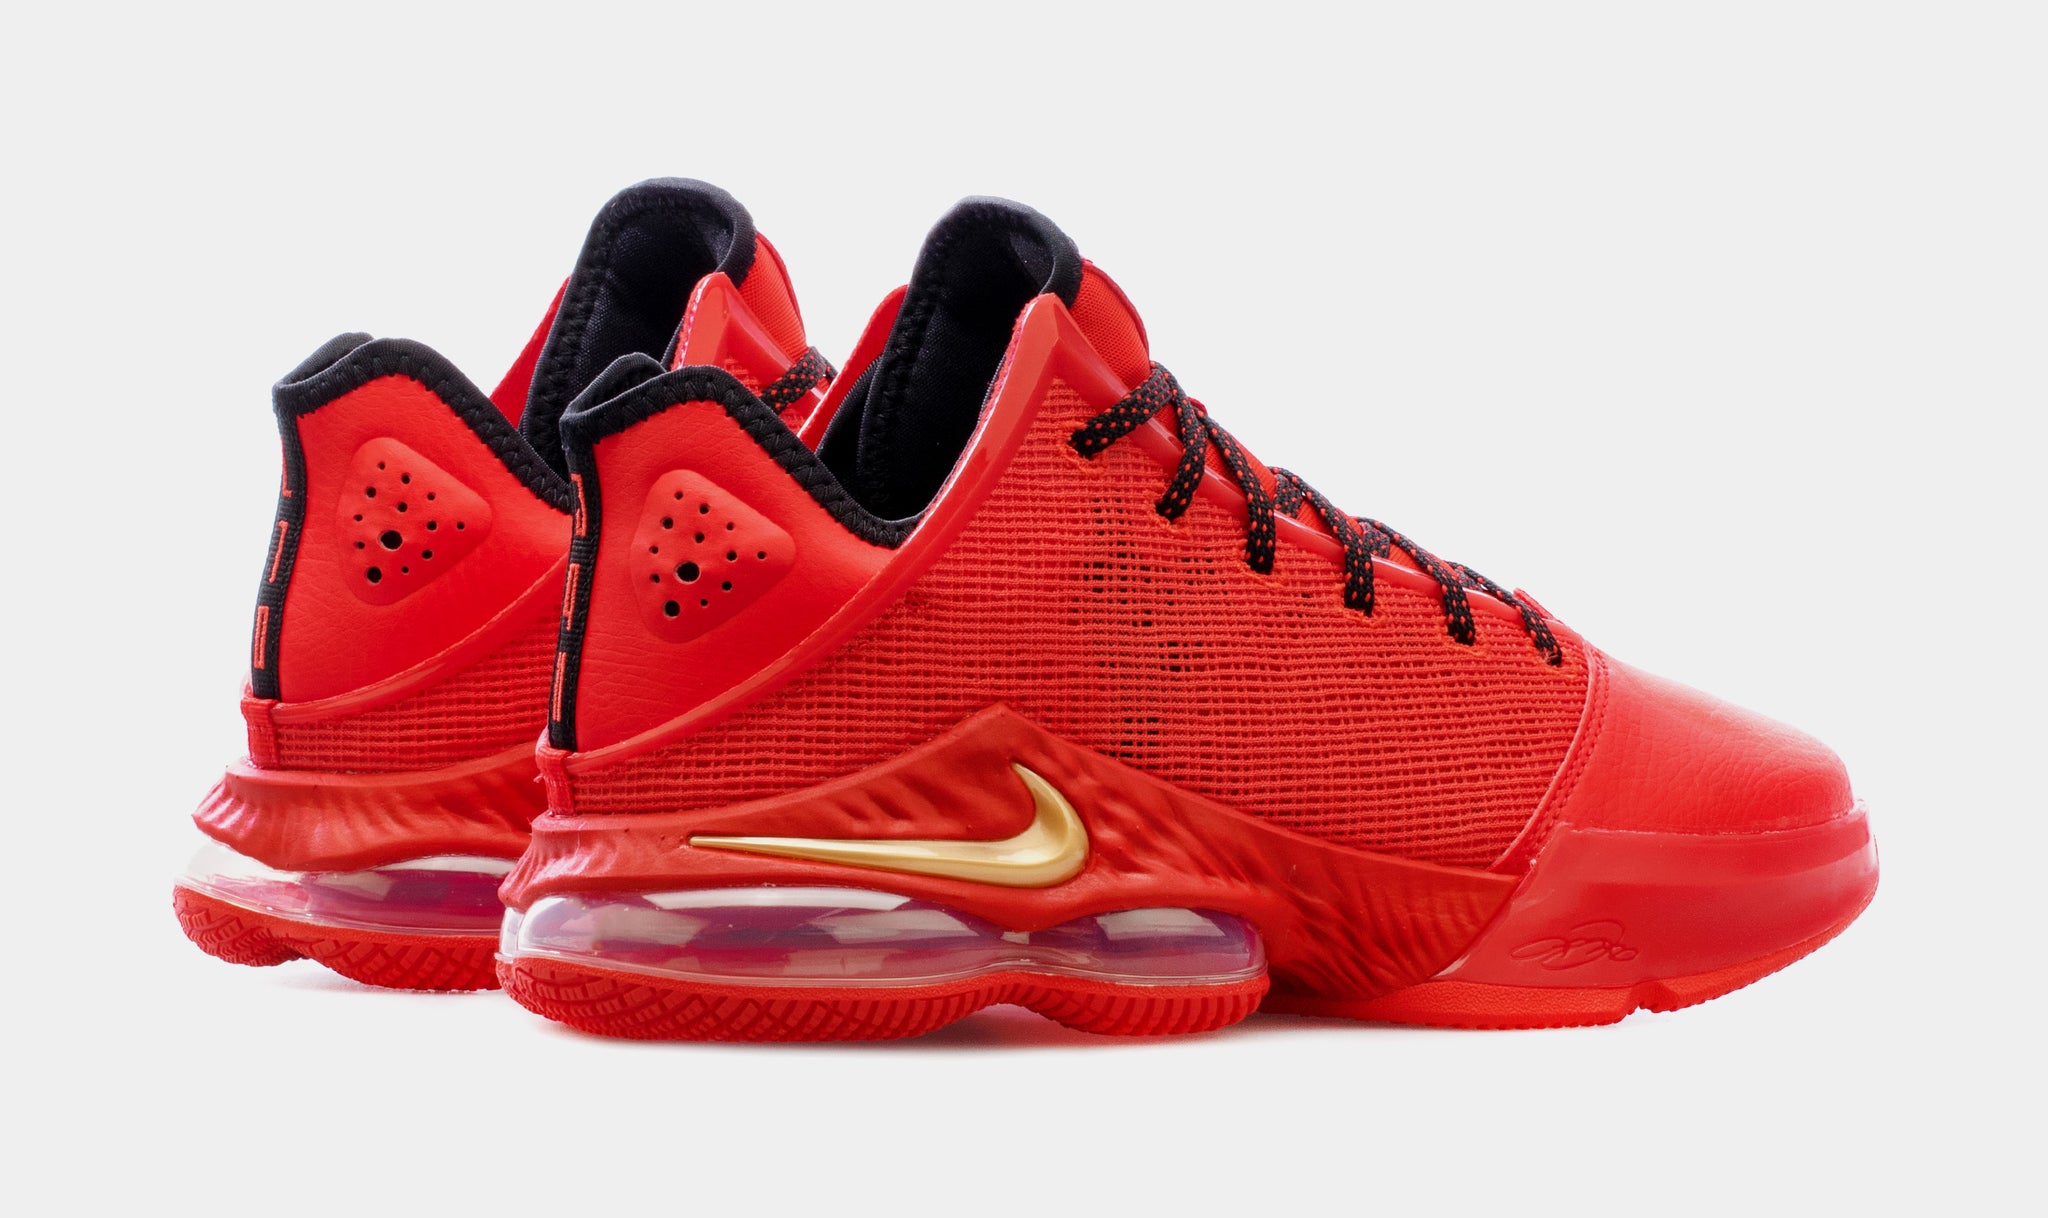 Mens Red Basketball Shoes.